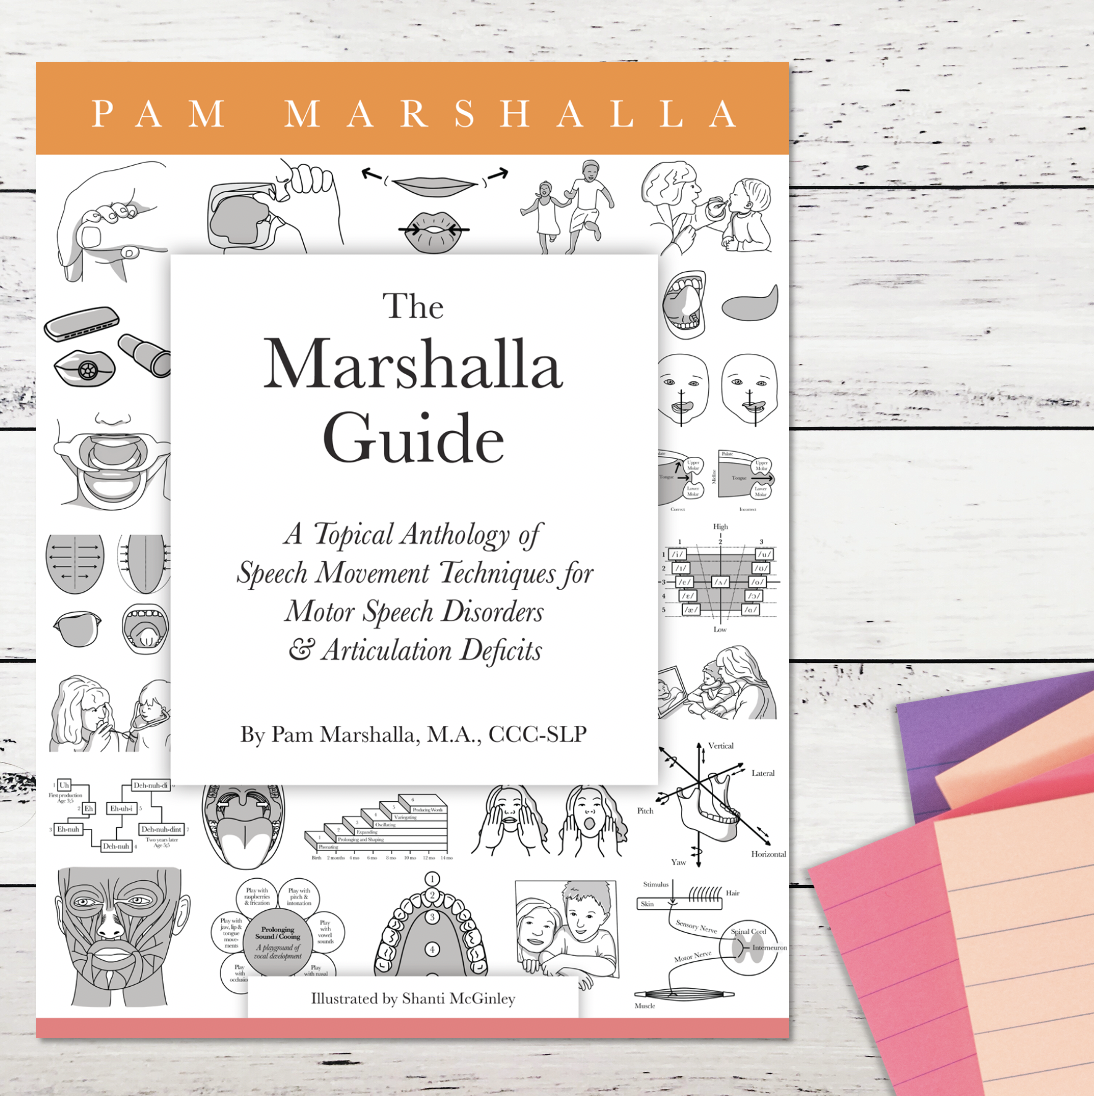 The Marshalla Guide